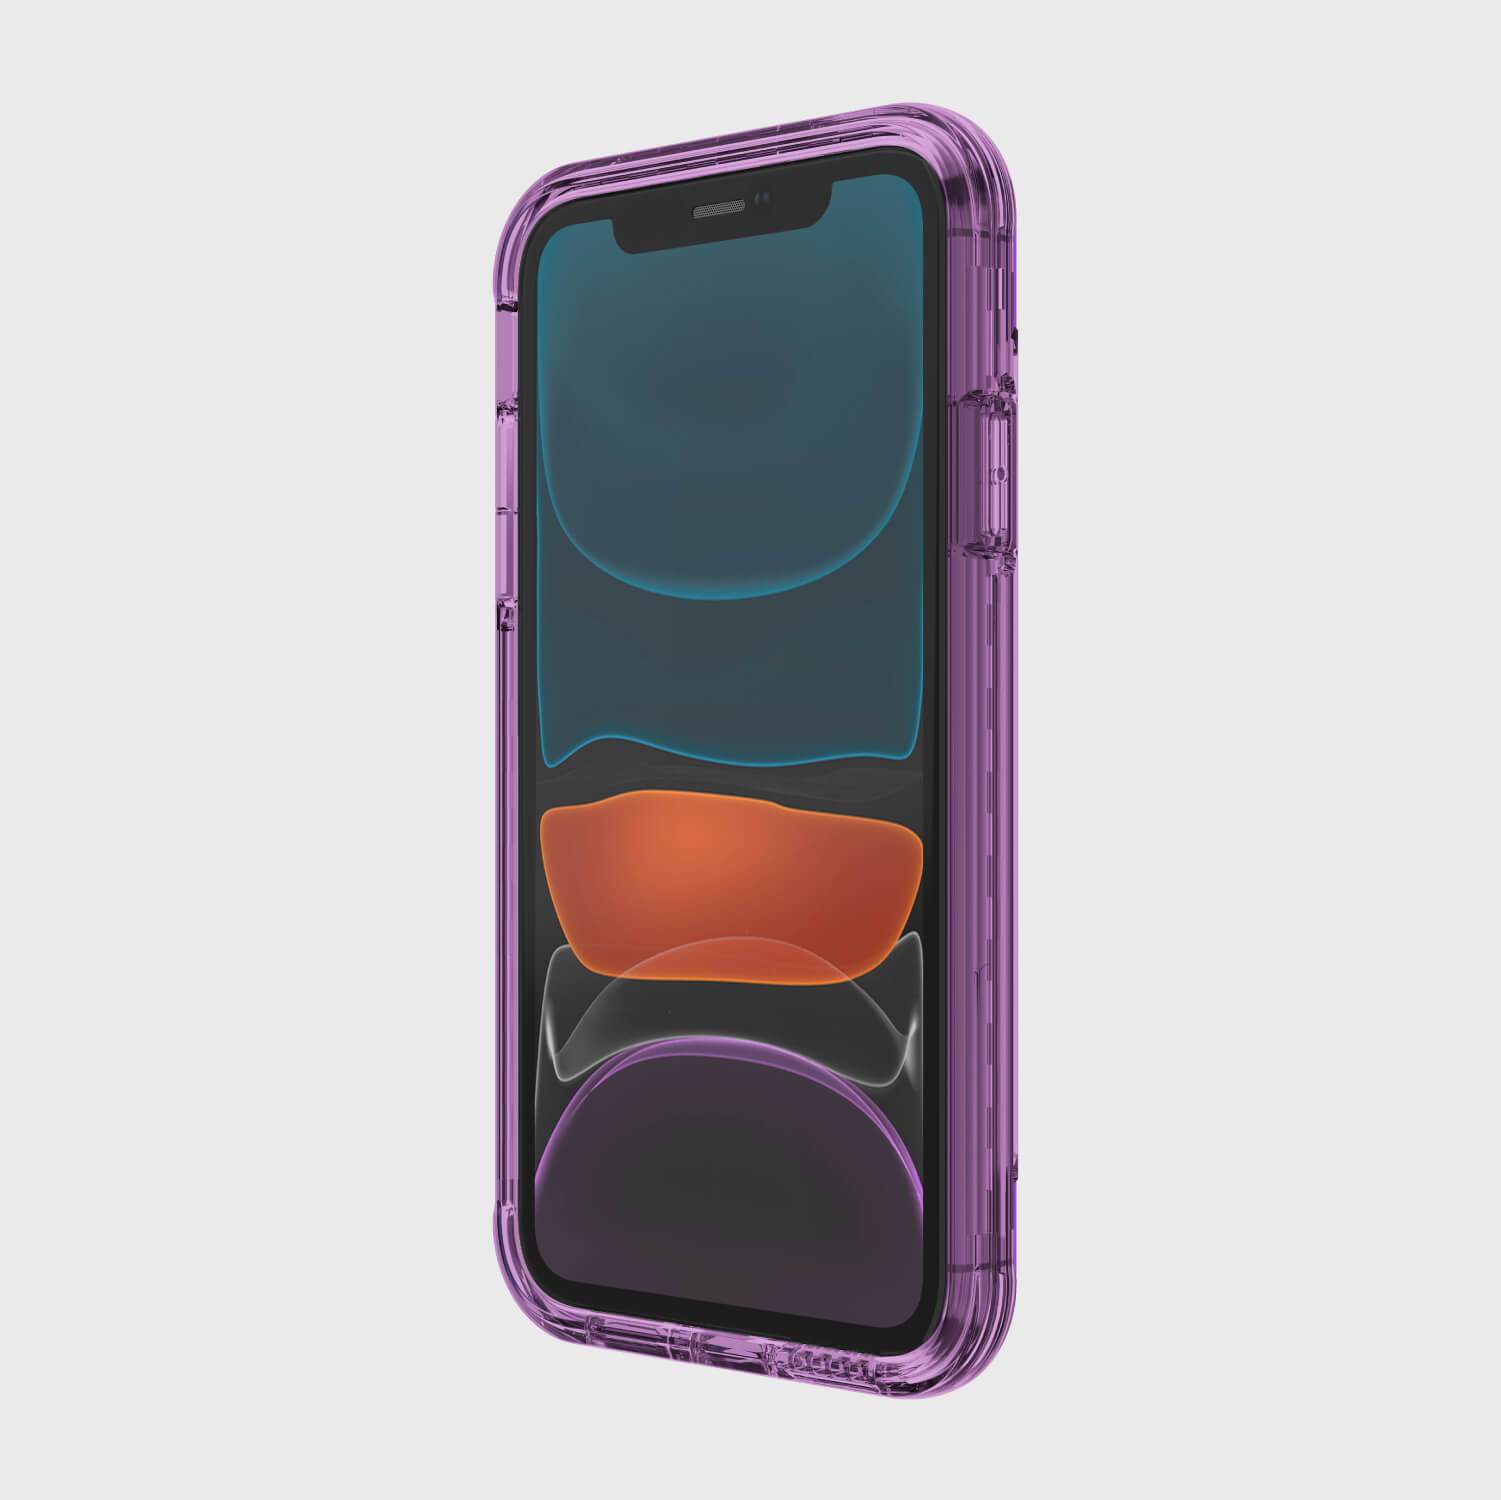 The back view of an iPhone 11 Pro case in purple with wireless charging capability - Raptic iPhone 11 Case - AIR.